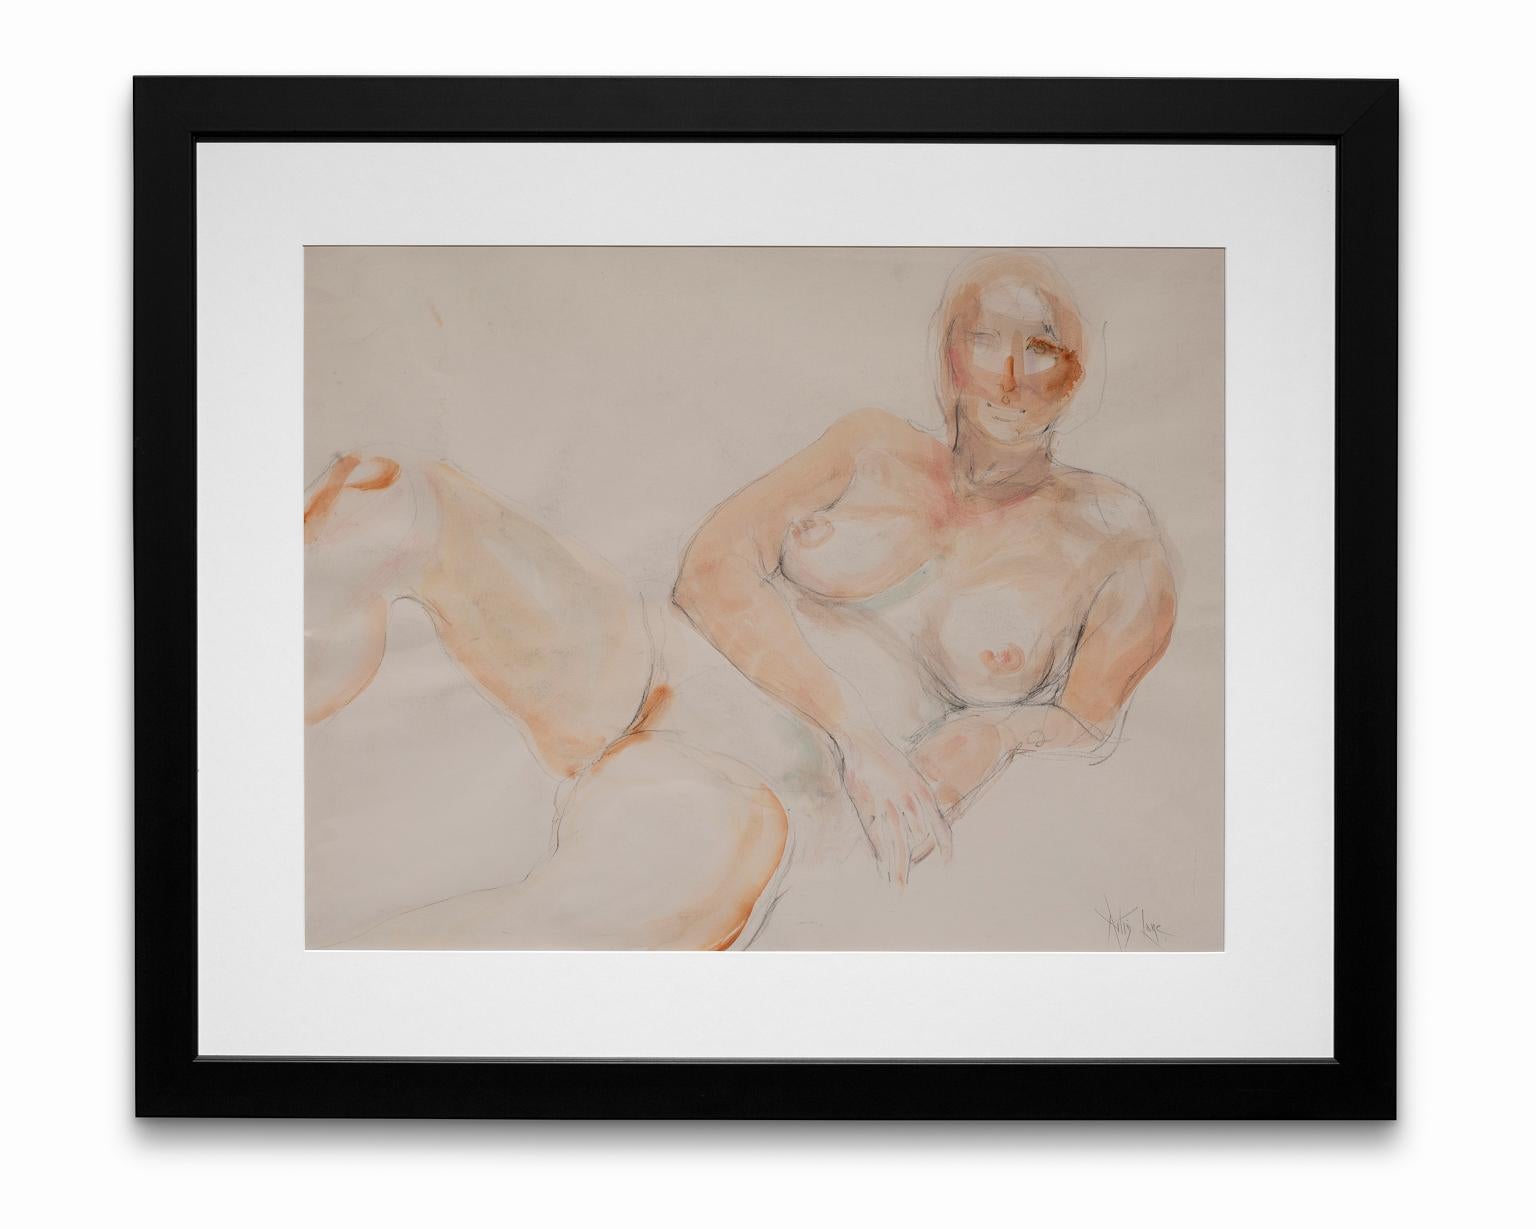 Artis Lane Nude Painting - "Nude Study", Watercolor and Graphite on Paper